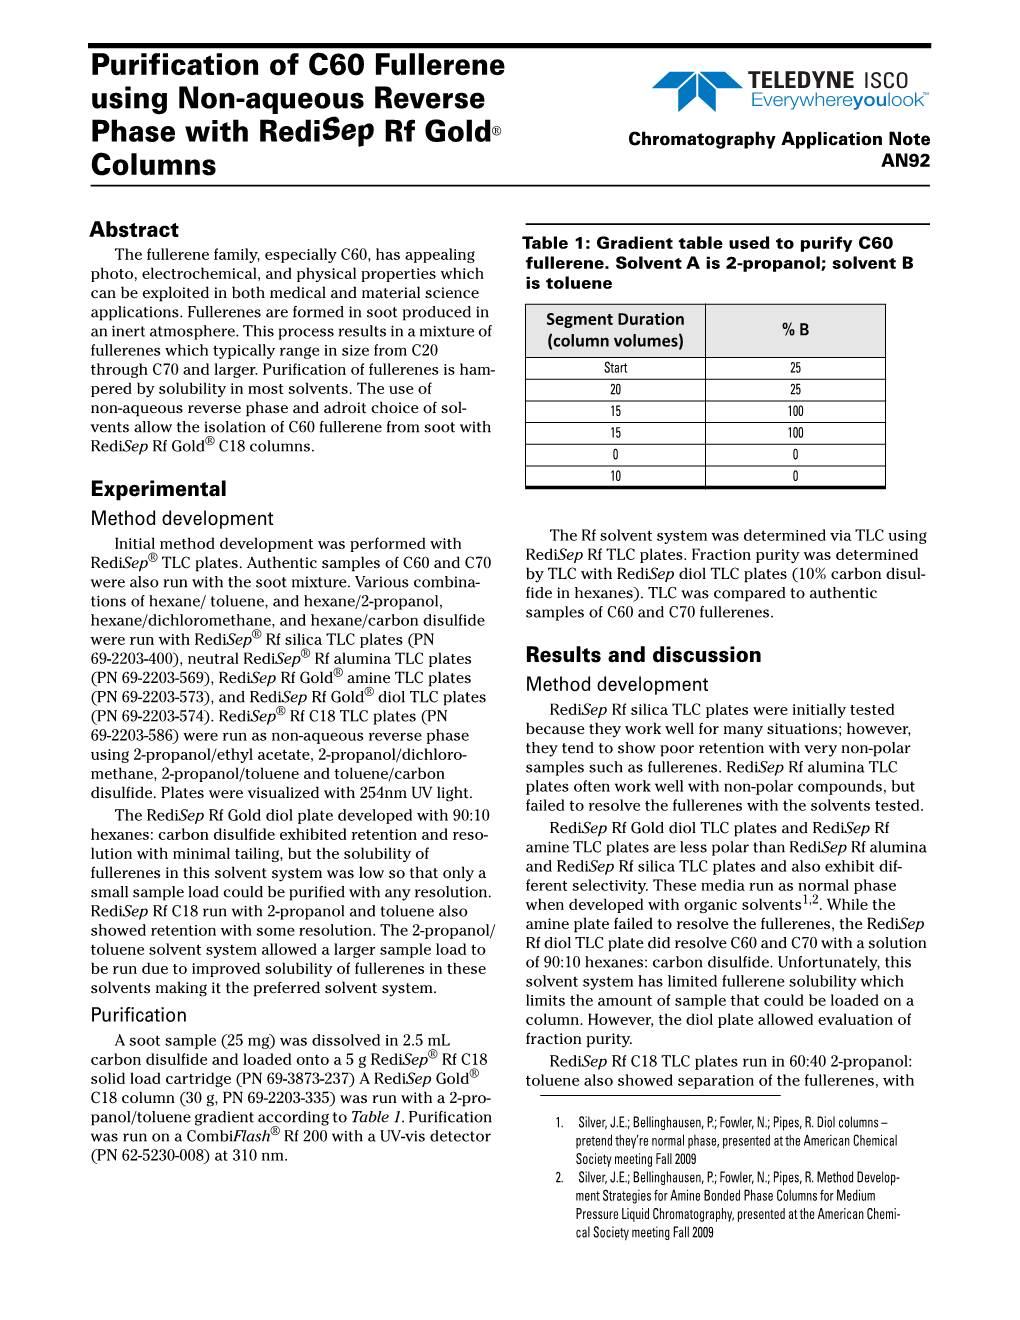 Purification of C60 Fullerene Using Non-Aqueous Reverse Phase with Redisep Rf Gold® Chromatography Application Note Columns AN92